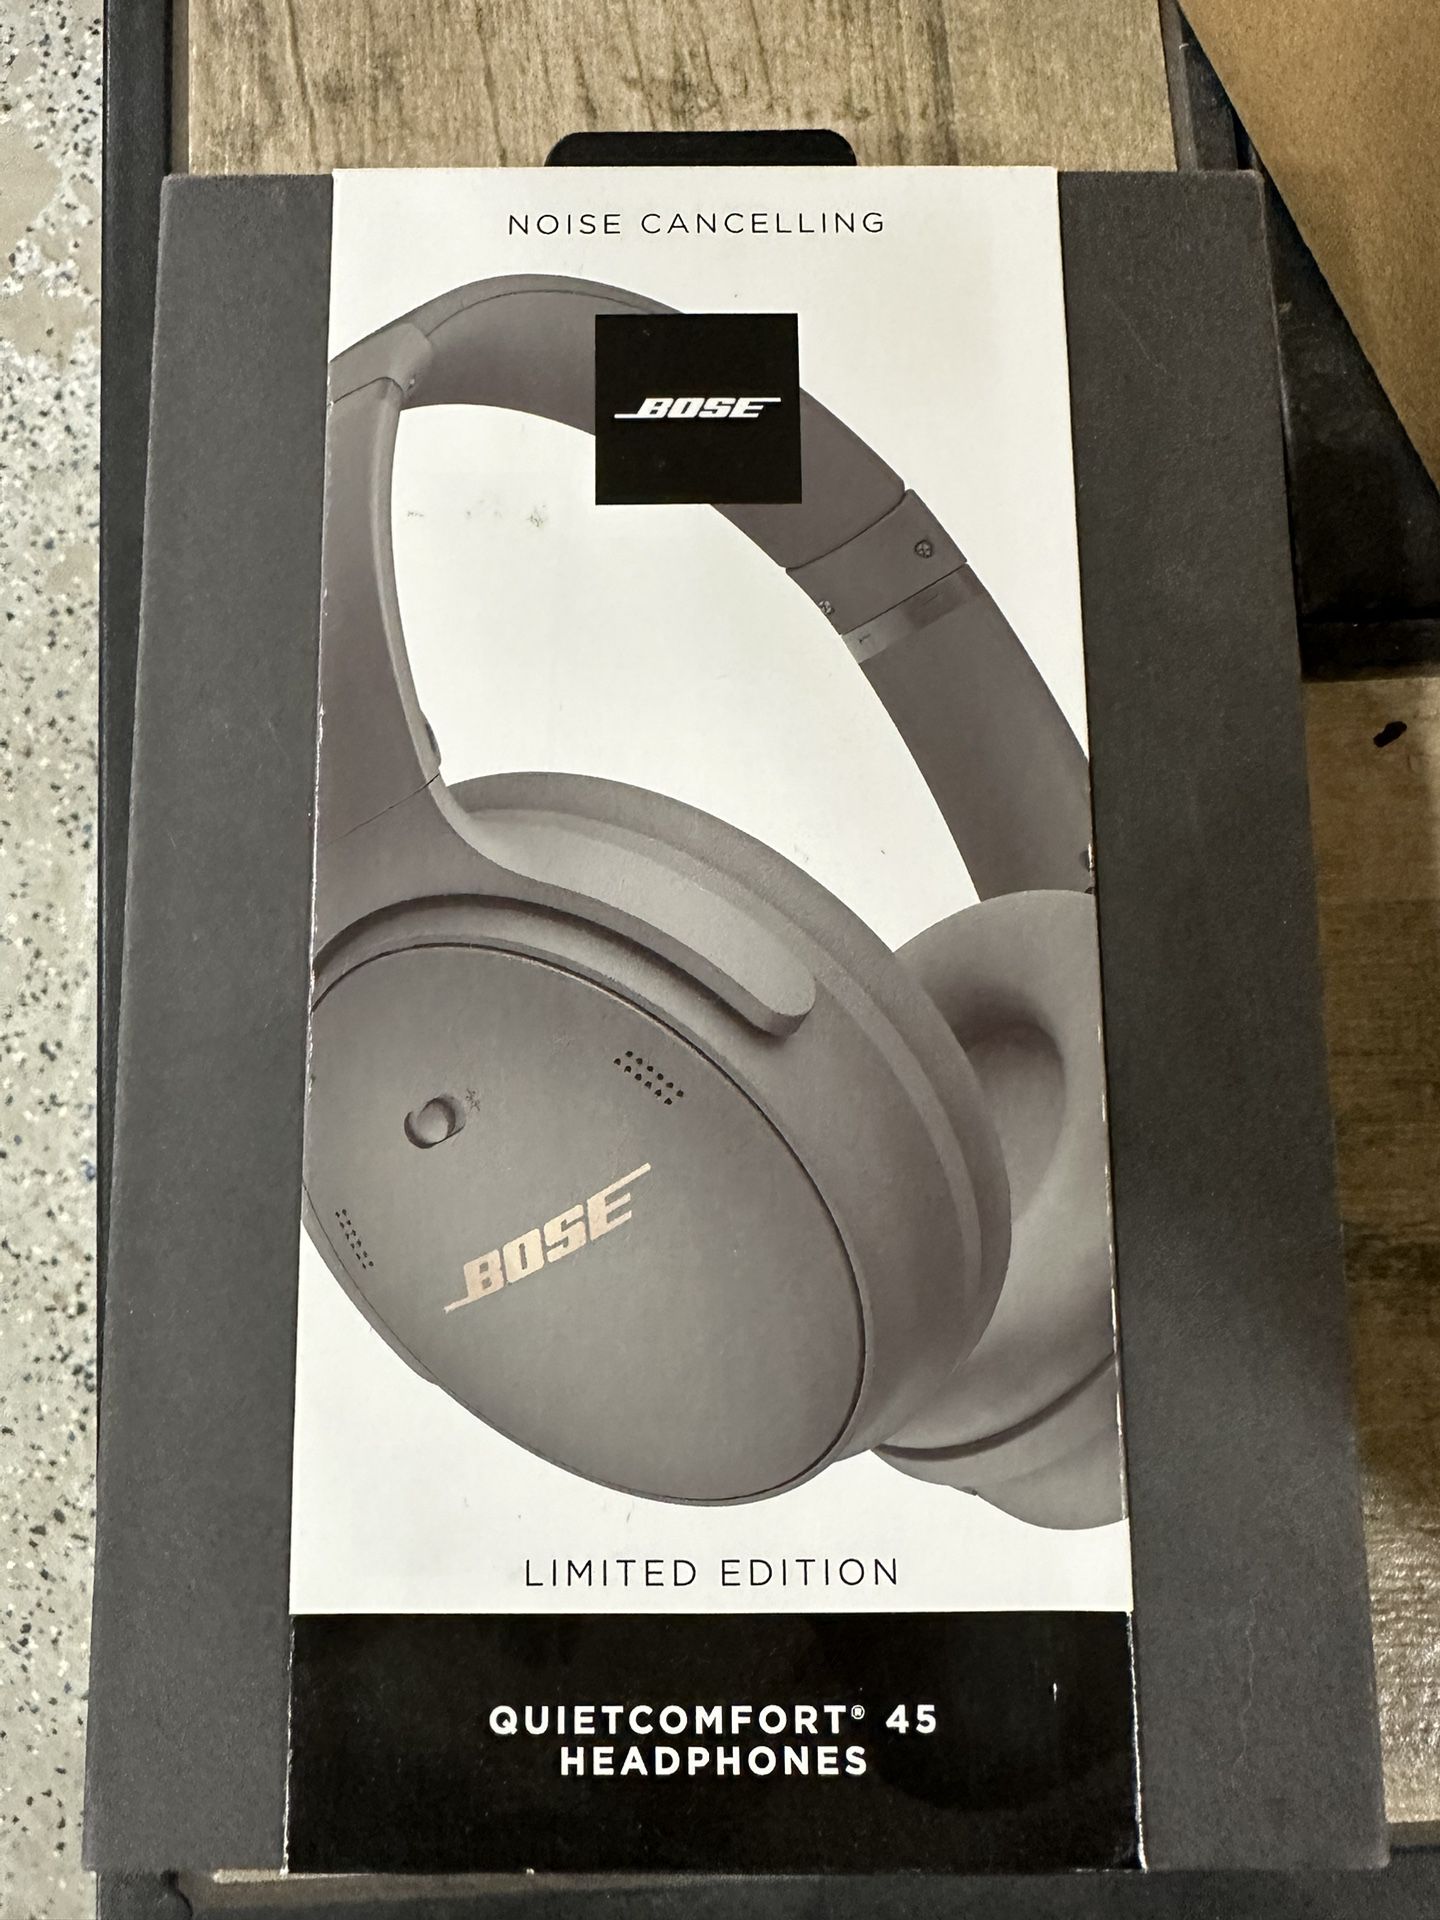 Bose Limited Edition